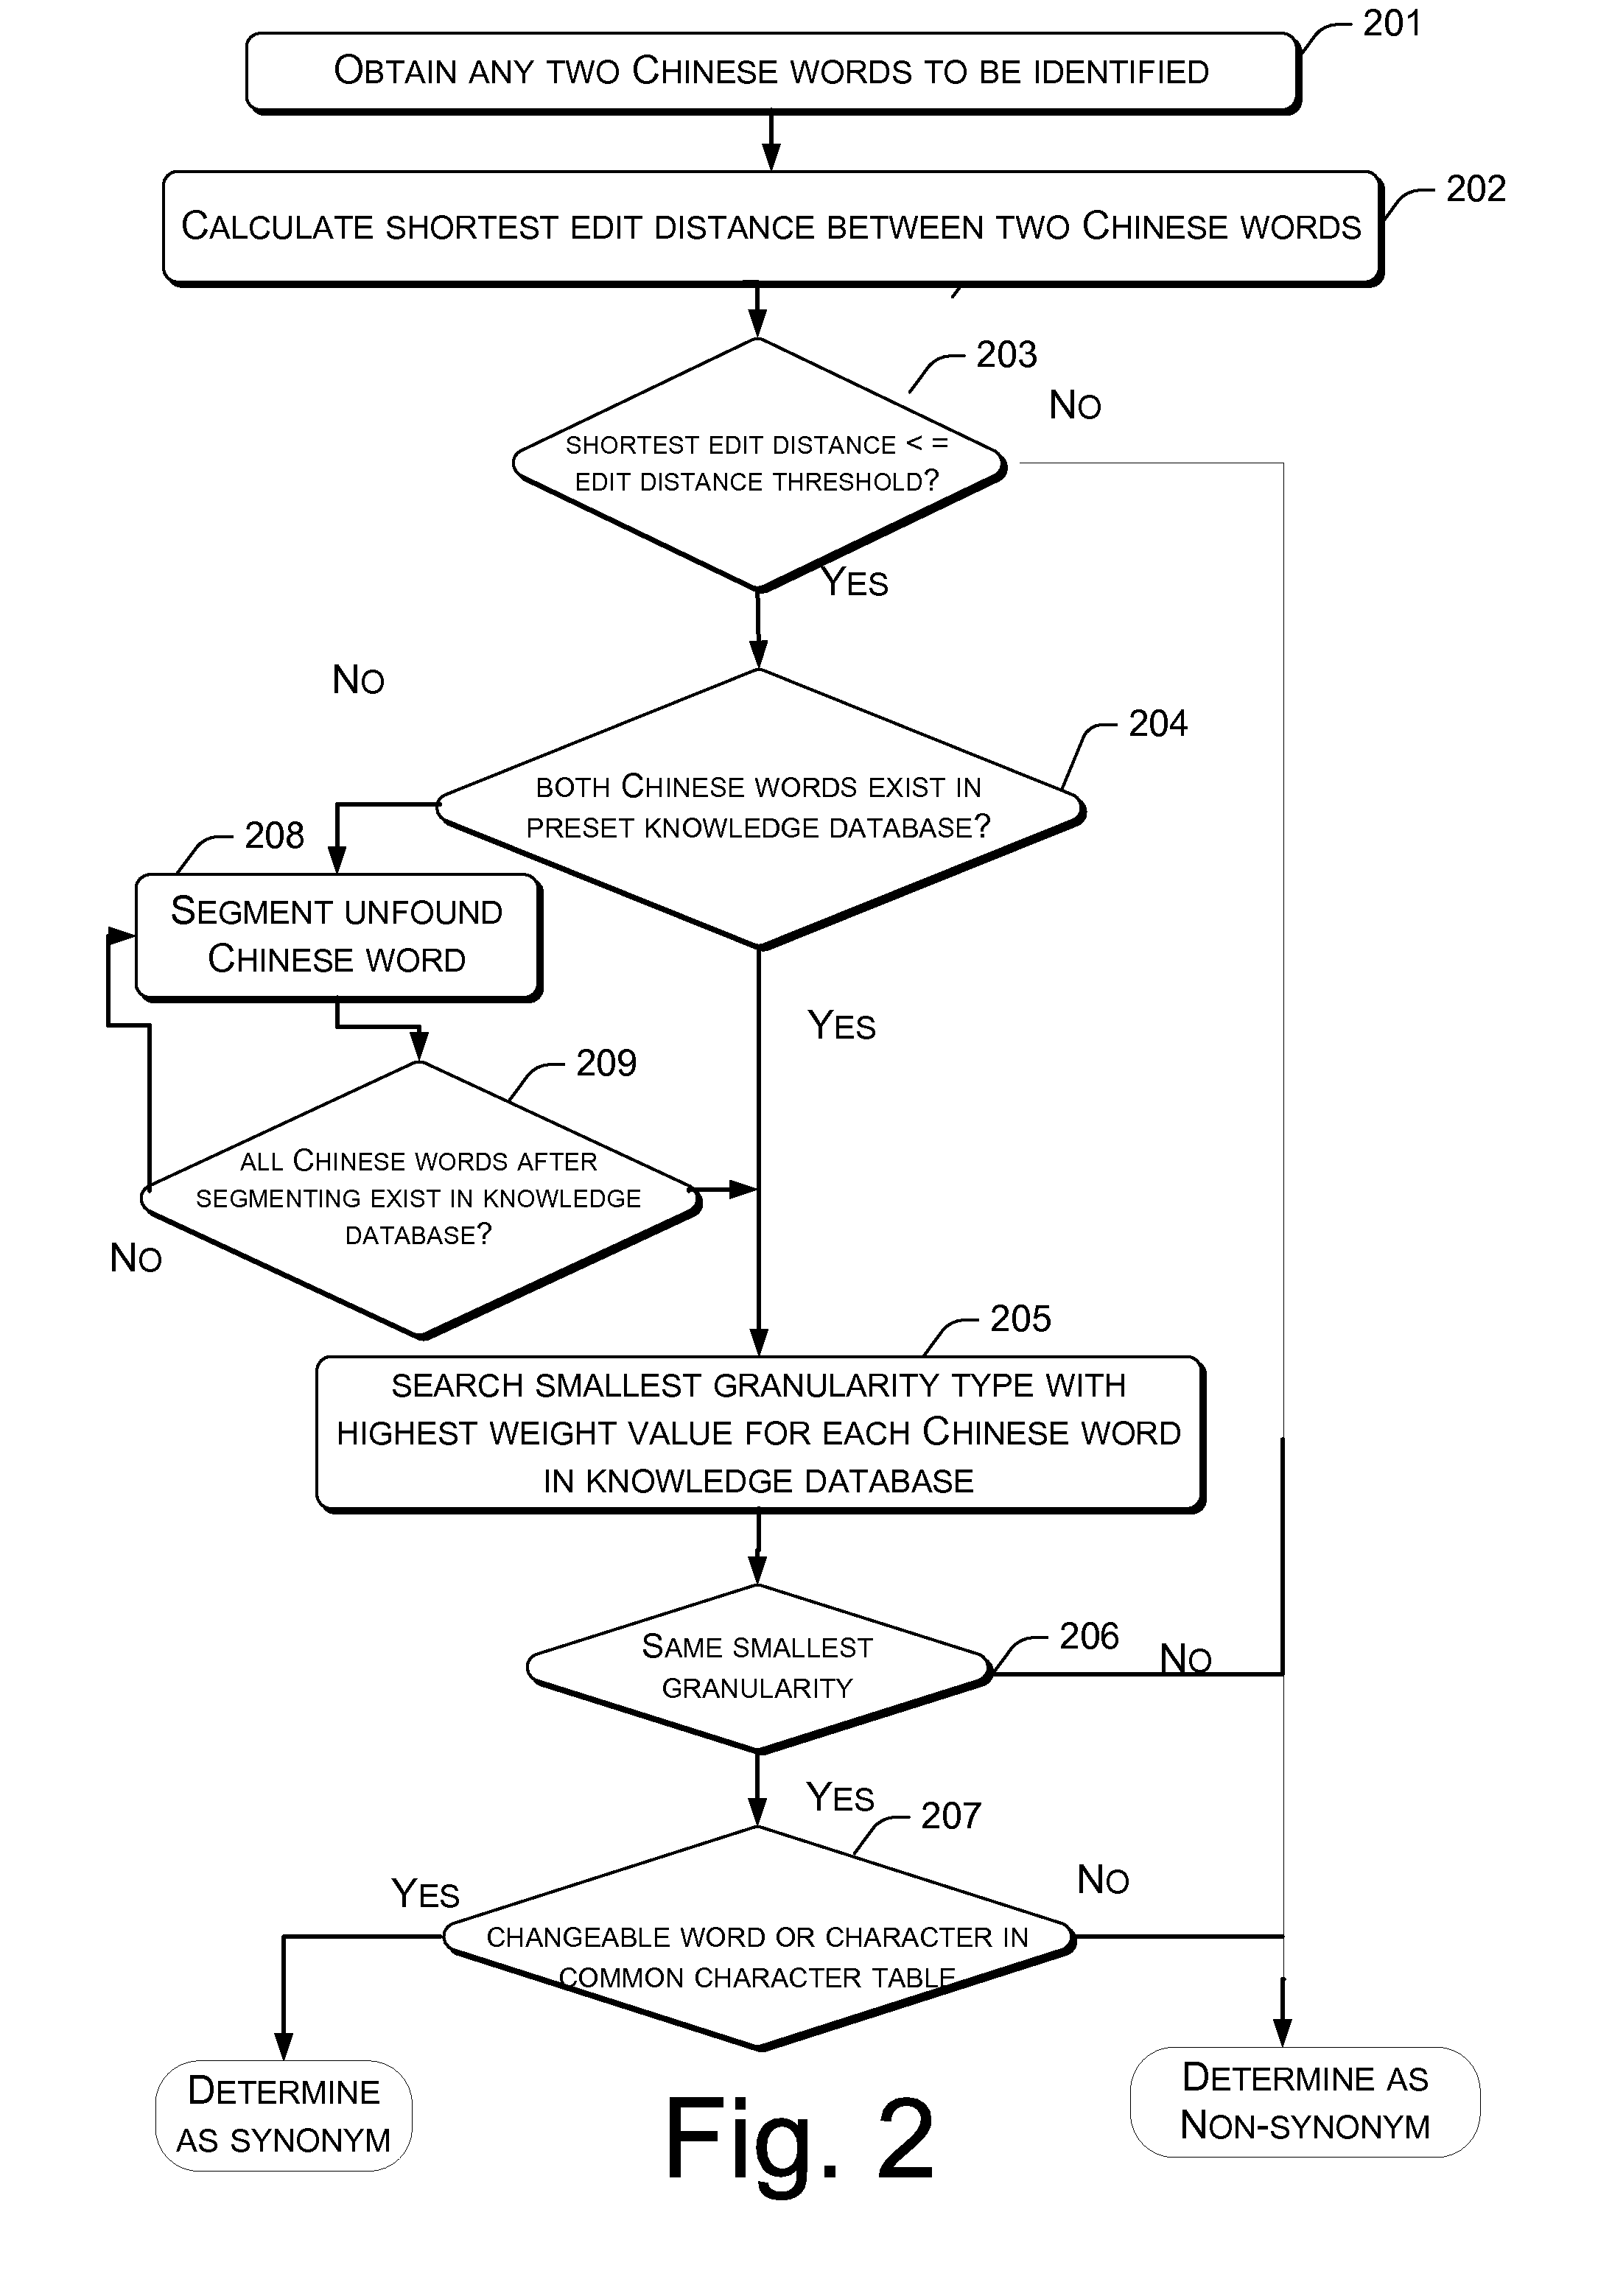 Method and Apparatus for Identifying Synonyms and Using Synonyms to Search